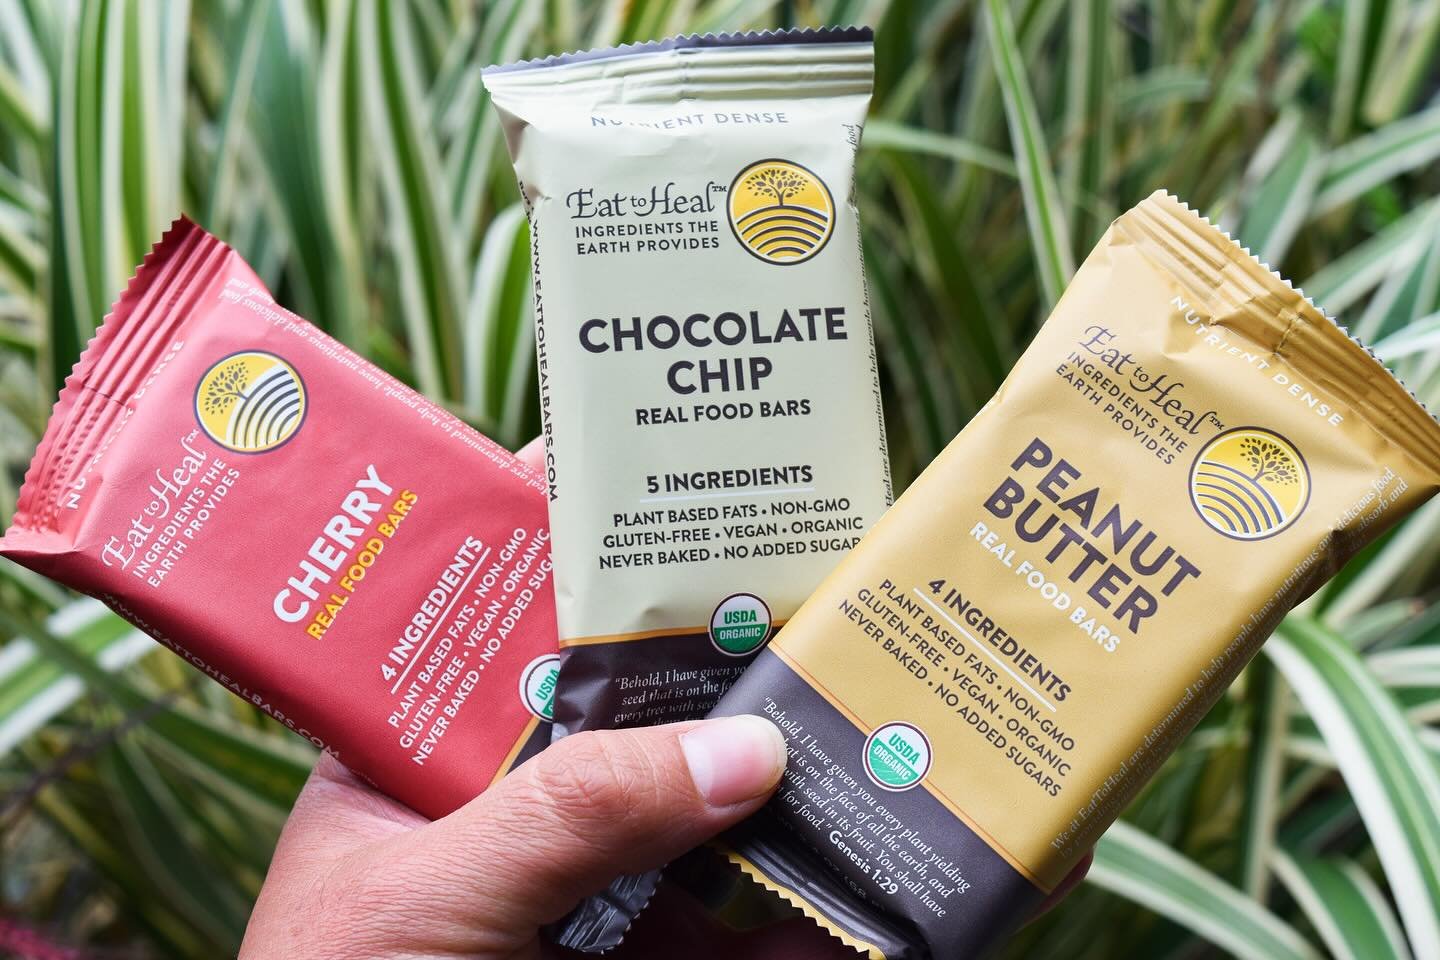 🌱 Introducing Real Food Bars by EatToHeal - Now Available in Our Shop! 🌱

We&rsquo;re excited to share that we&rsquo;ve added Real Food Bars by @EatToHealBars to our shelves! Each Real Food Bar is deliciously dense with nutrients and designed to ke